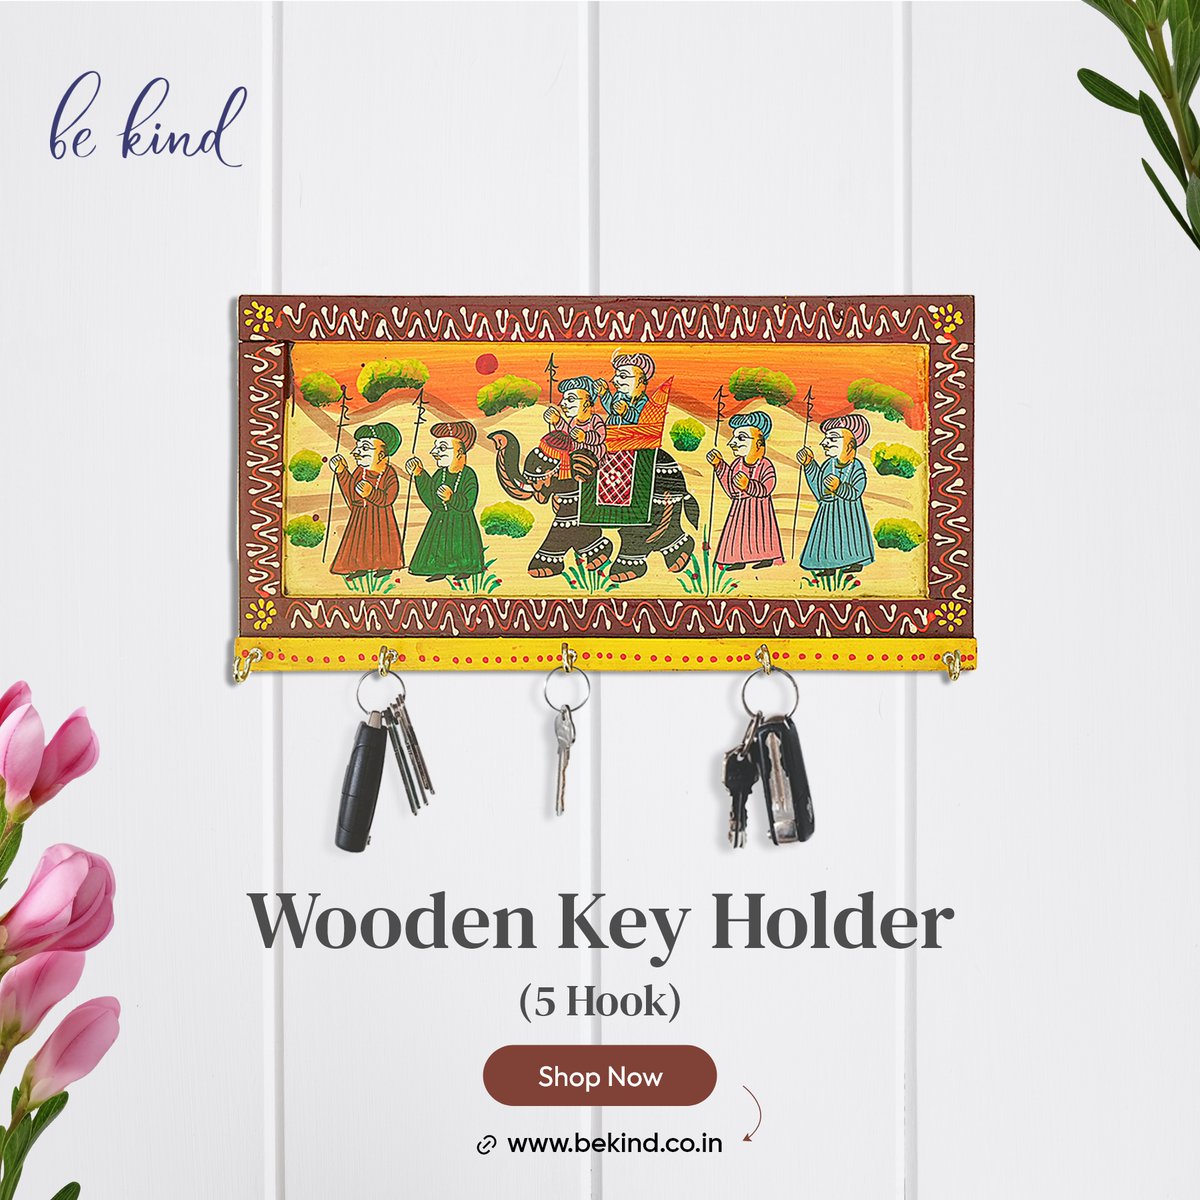 Discover our Hand Painted Wooden Key Holder, a masterpiece of Rajasthan artistry, now available at an exclusive 60% off! Hurry, grab yours now. t.ly/22lhO
#HandPaintedArt #WoodenKeyHolder #HomeDecor #OfficeDecor #ExclusiveOffer #DiscountDeals  #LimitedTimeOffer